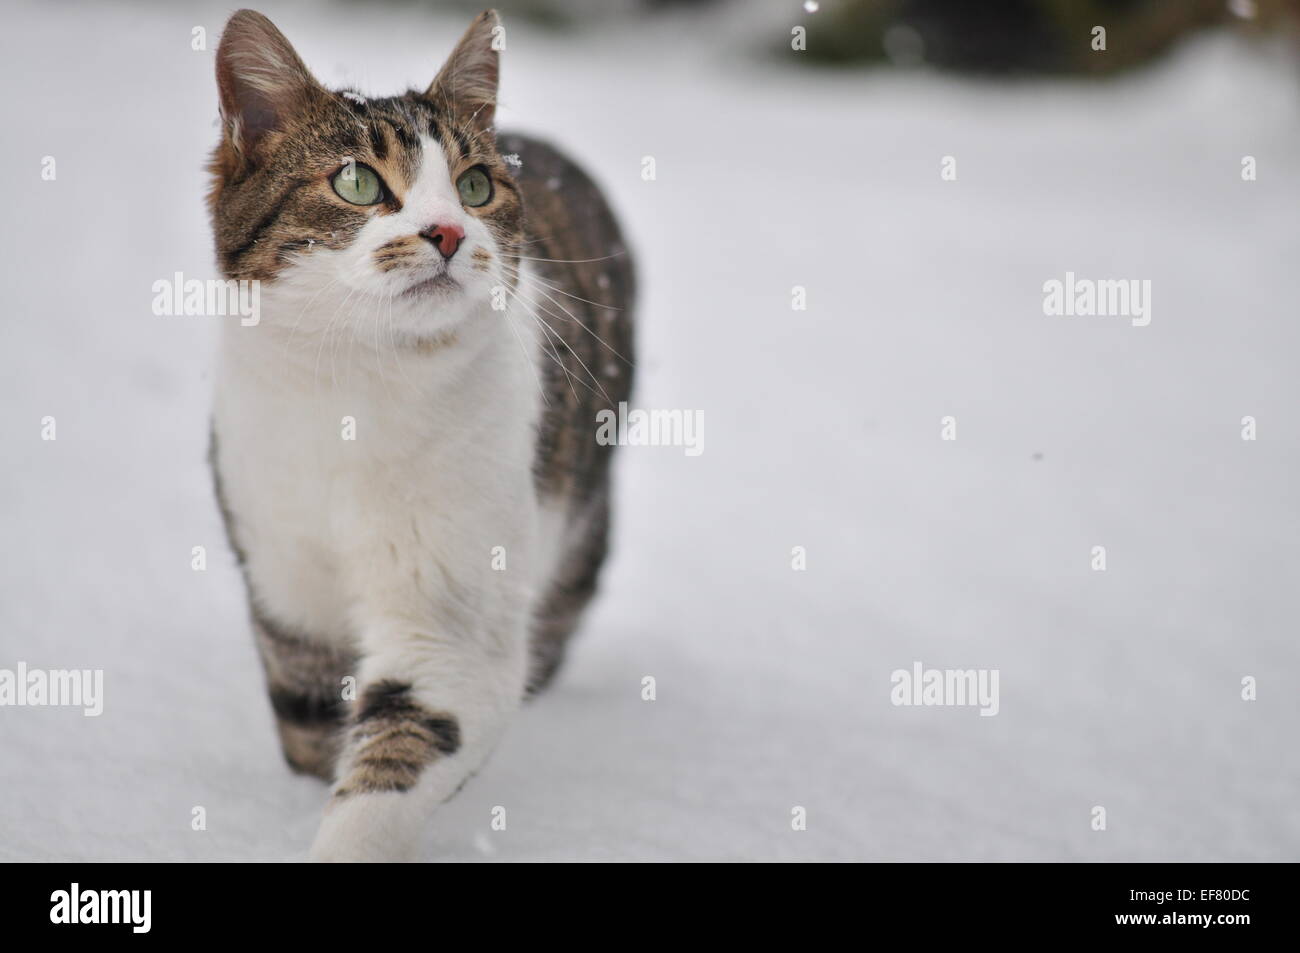 Cat prowling Through the Snow. Stock Photo